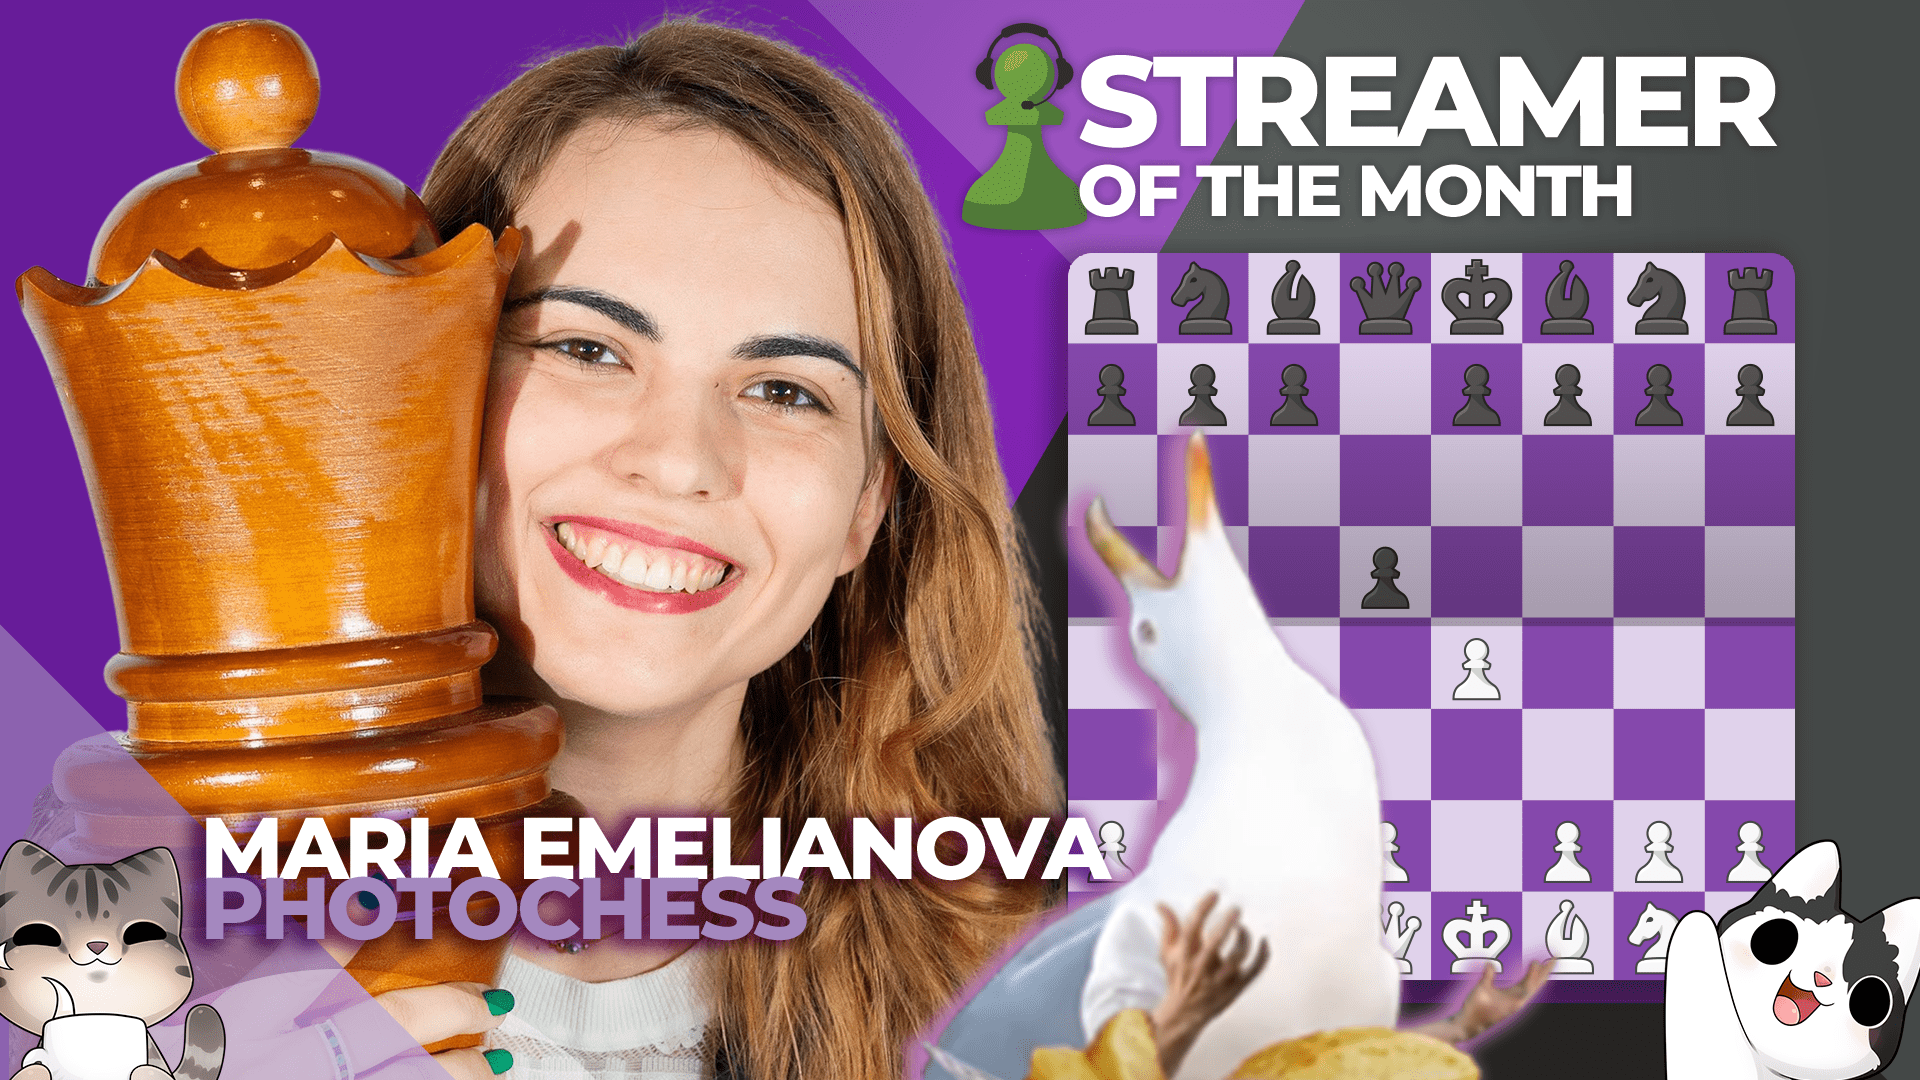 Join me for some intense chess matches with my viewers on Twitch